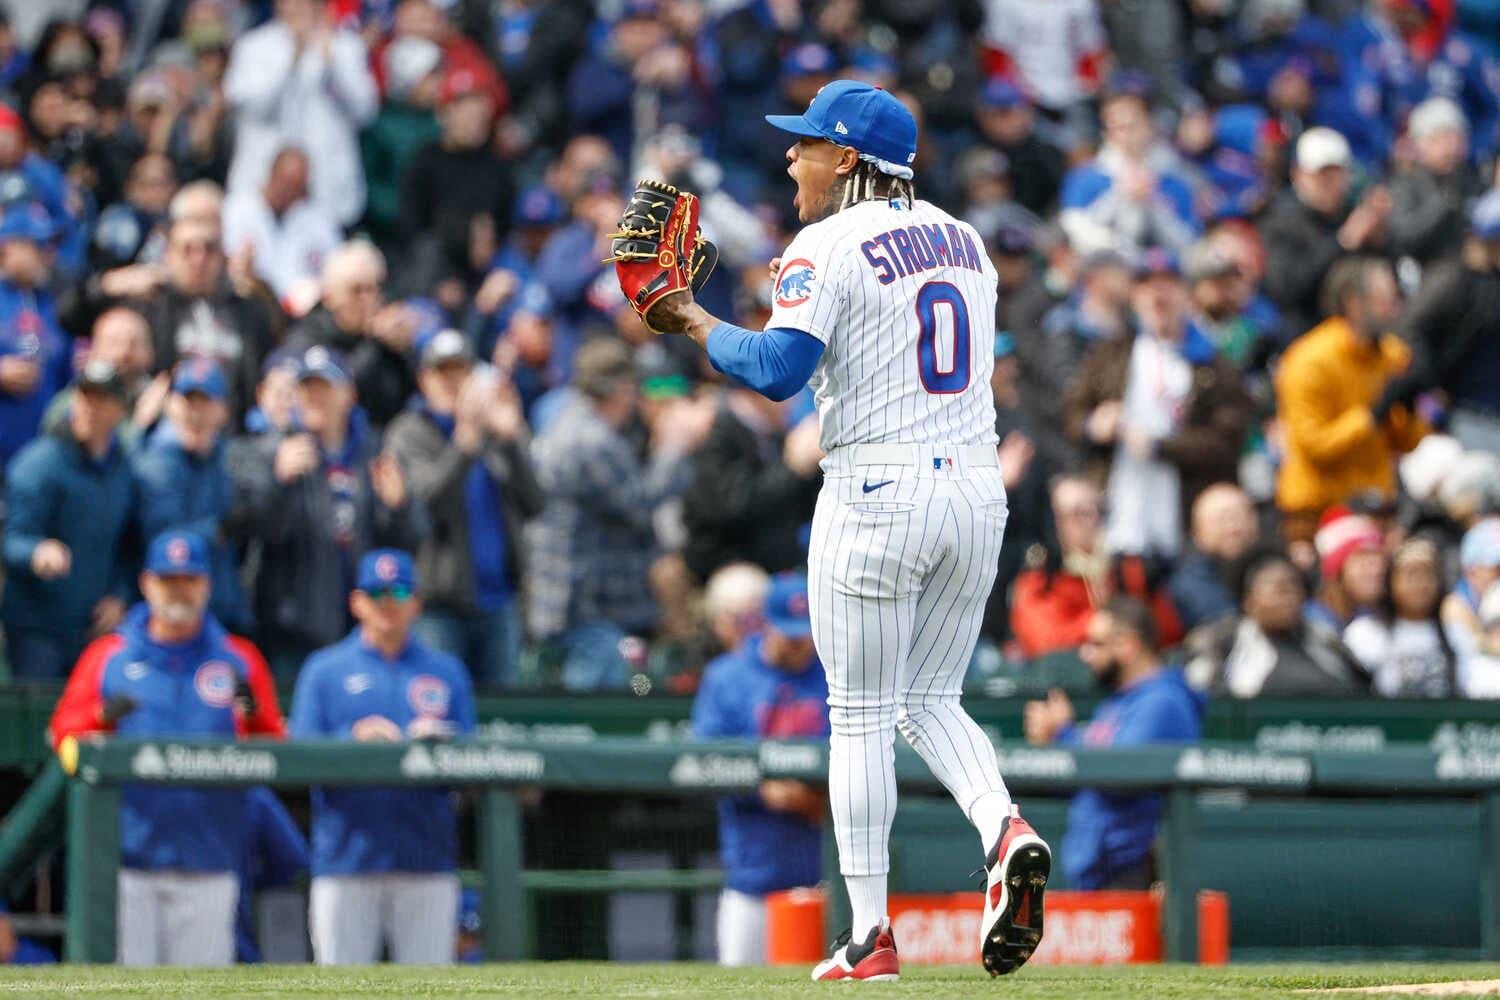 Marcus Stroman of the Chicago Cubs was charged with the first pitch clock violation in major league history. It did not seem to bother the veteran right-hander who threw six scoreless innings in a win over Milwaukee.